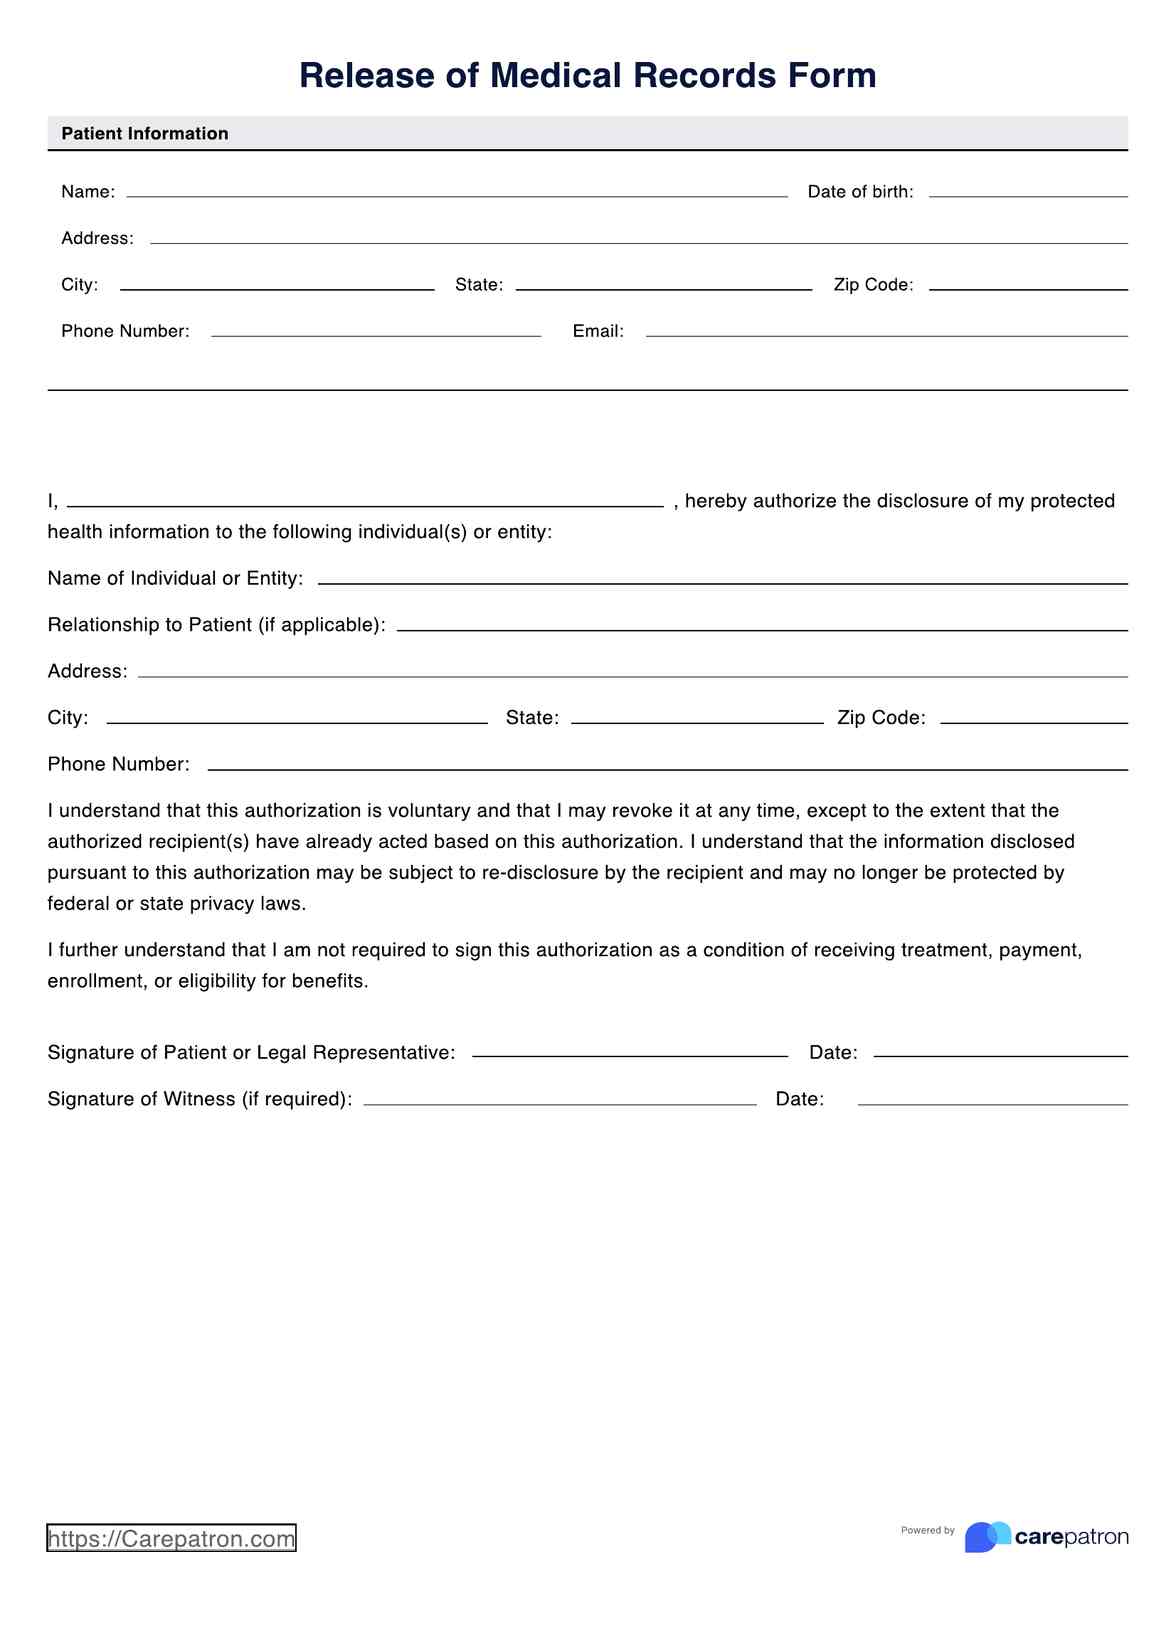 Release Of Medical Records Form PDF Example